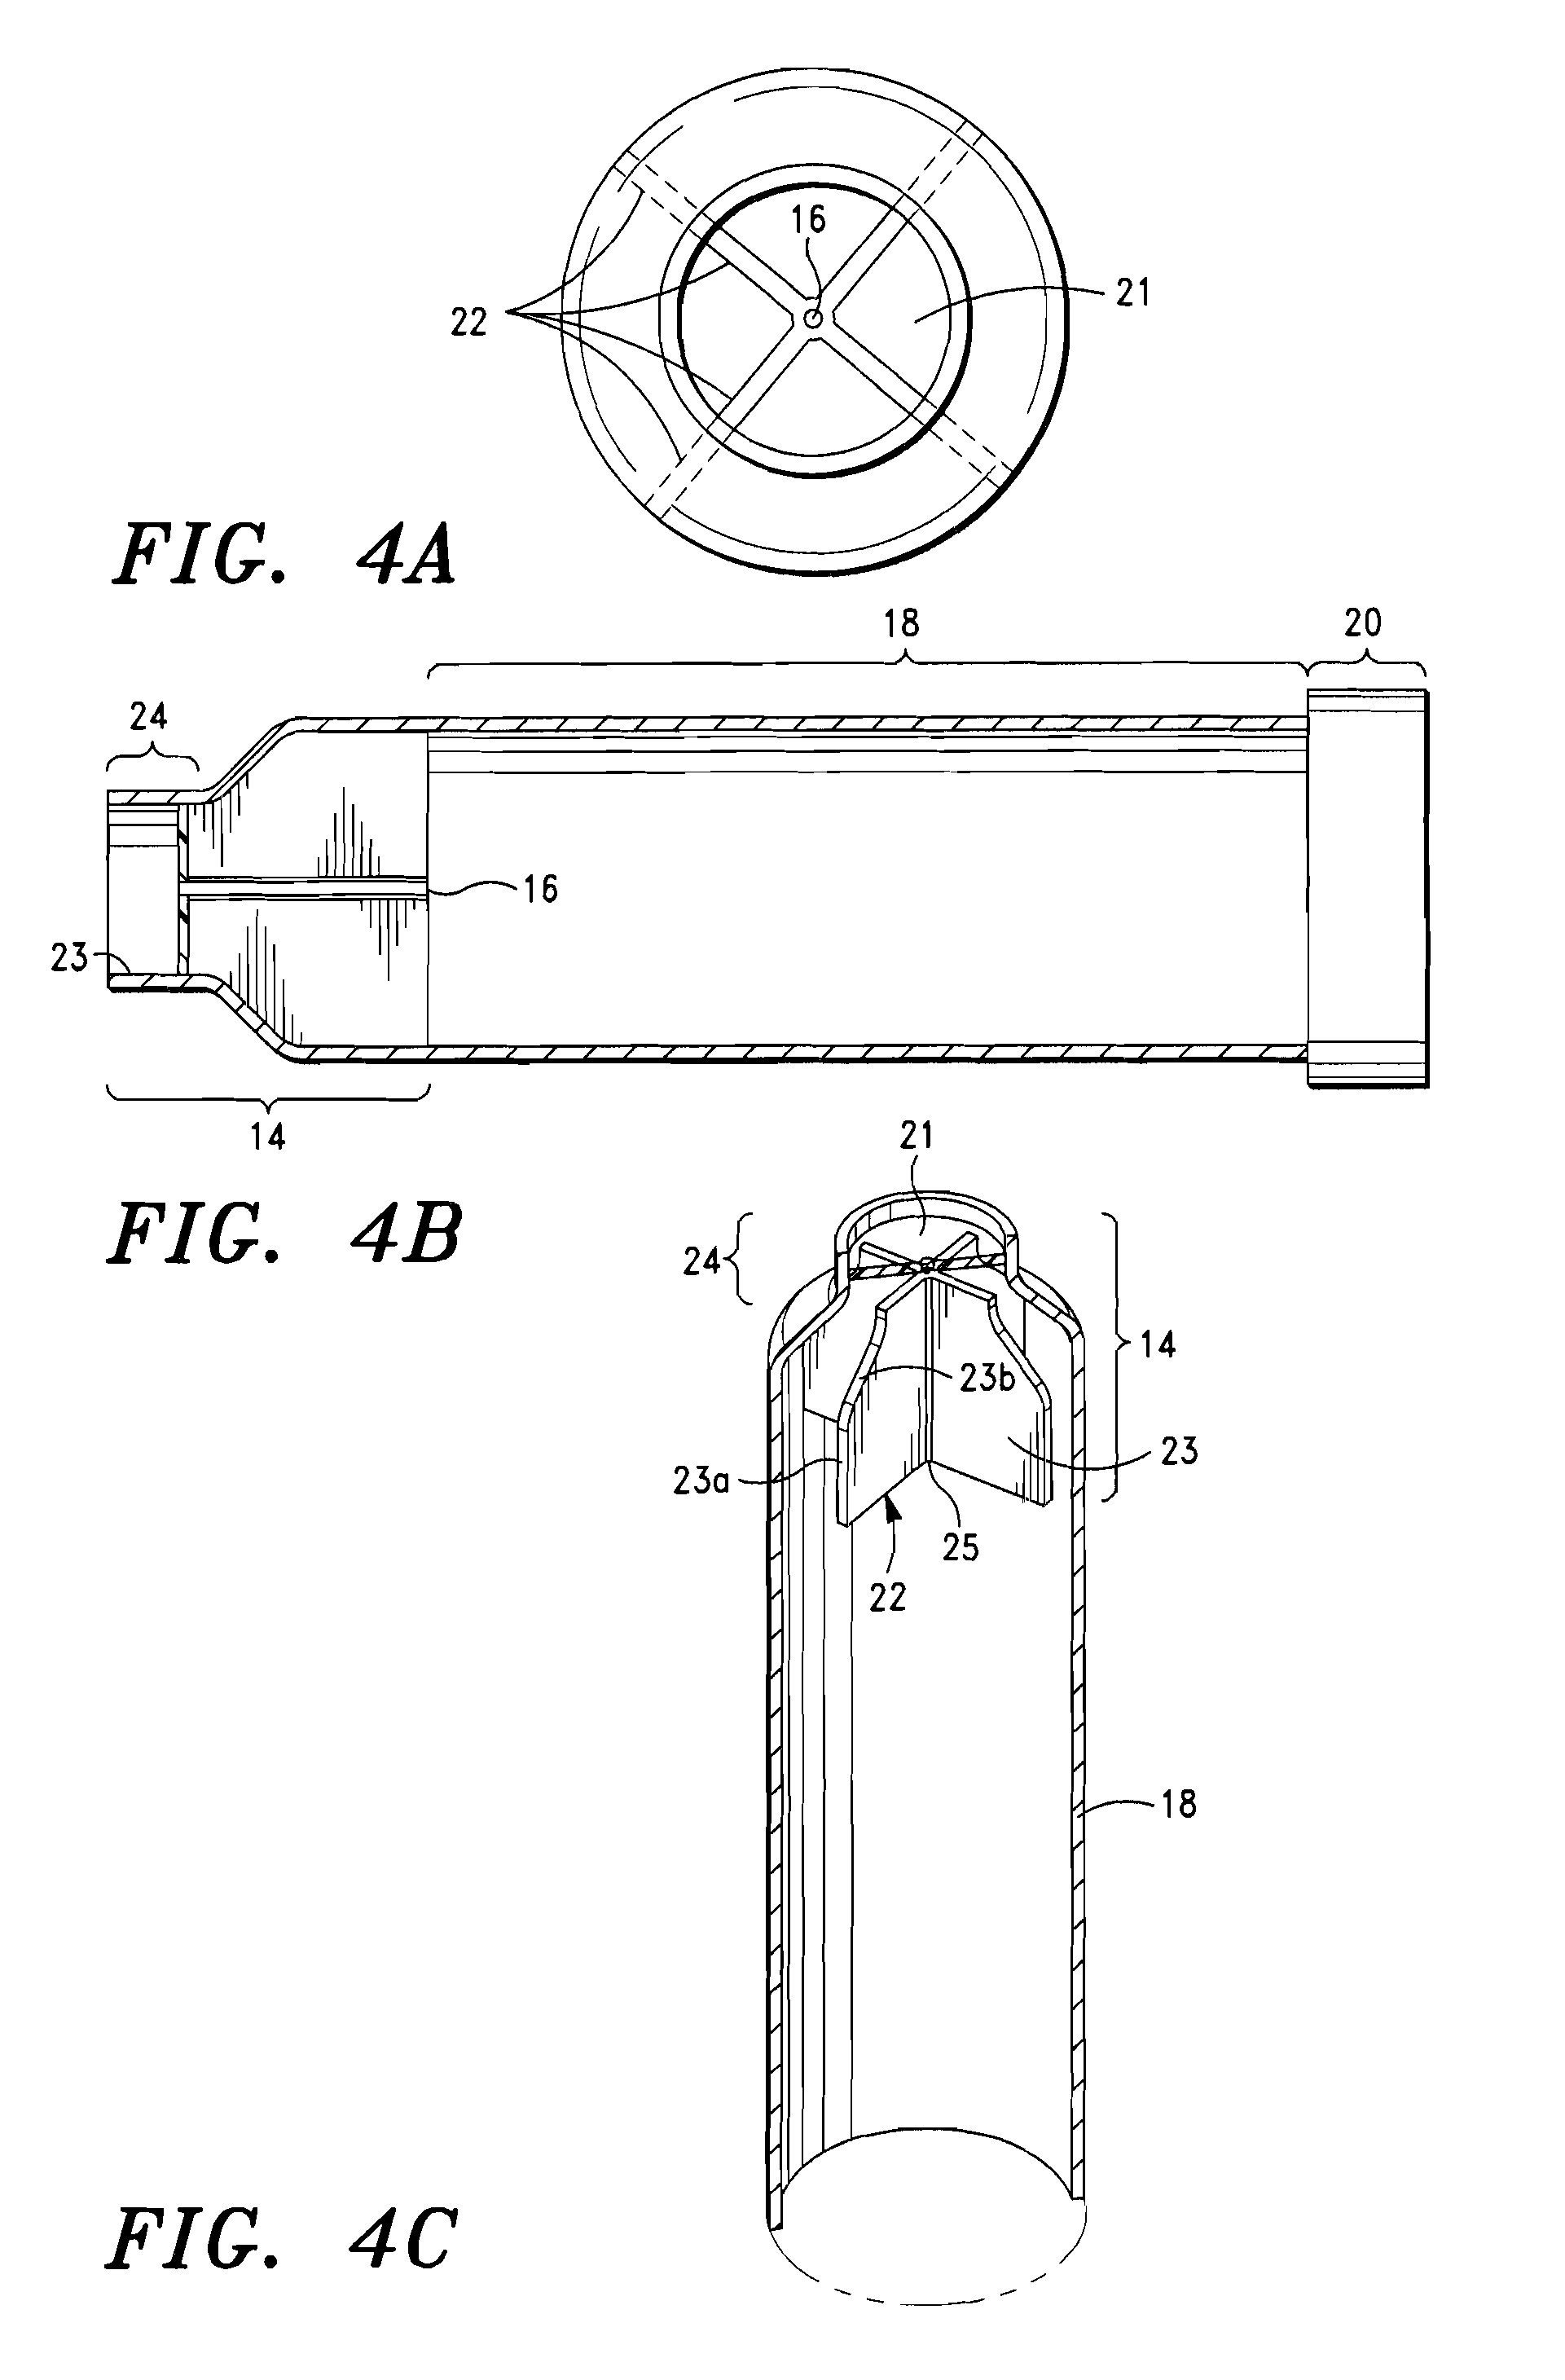 Mouthpiece and Flow Rate Controller for Intrapulmonary Delivery Devices